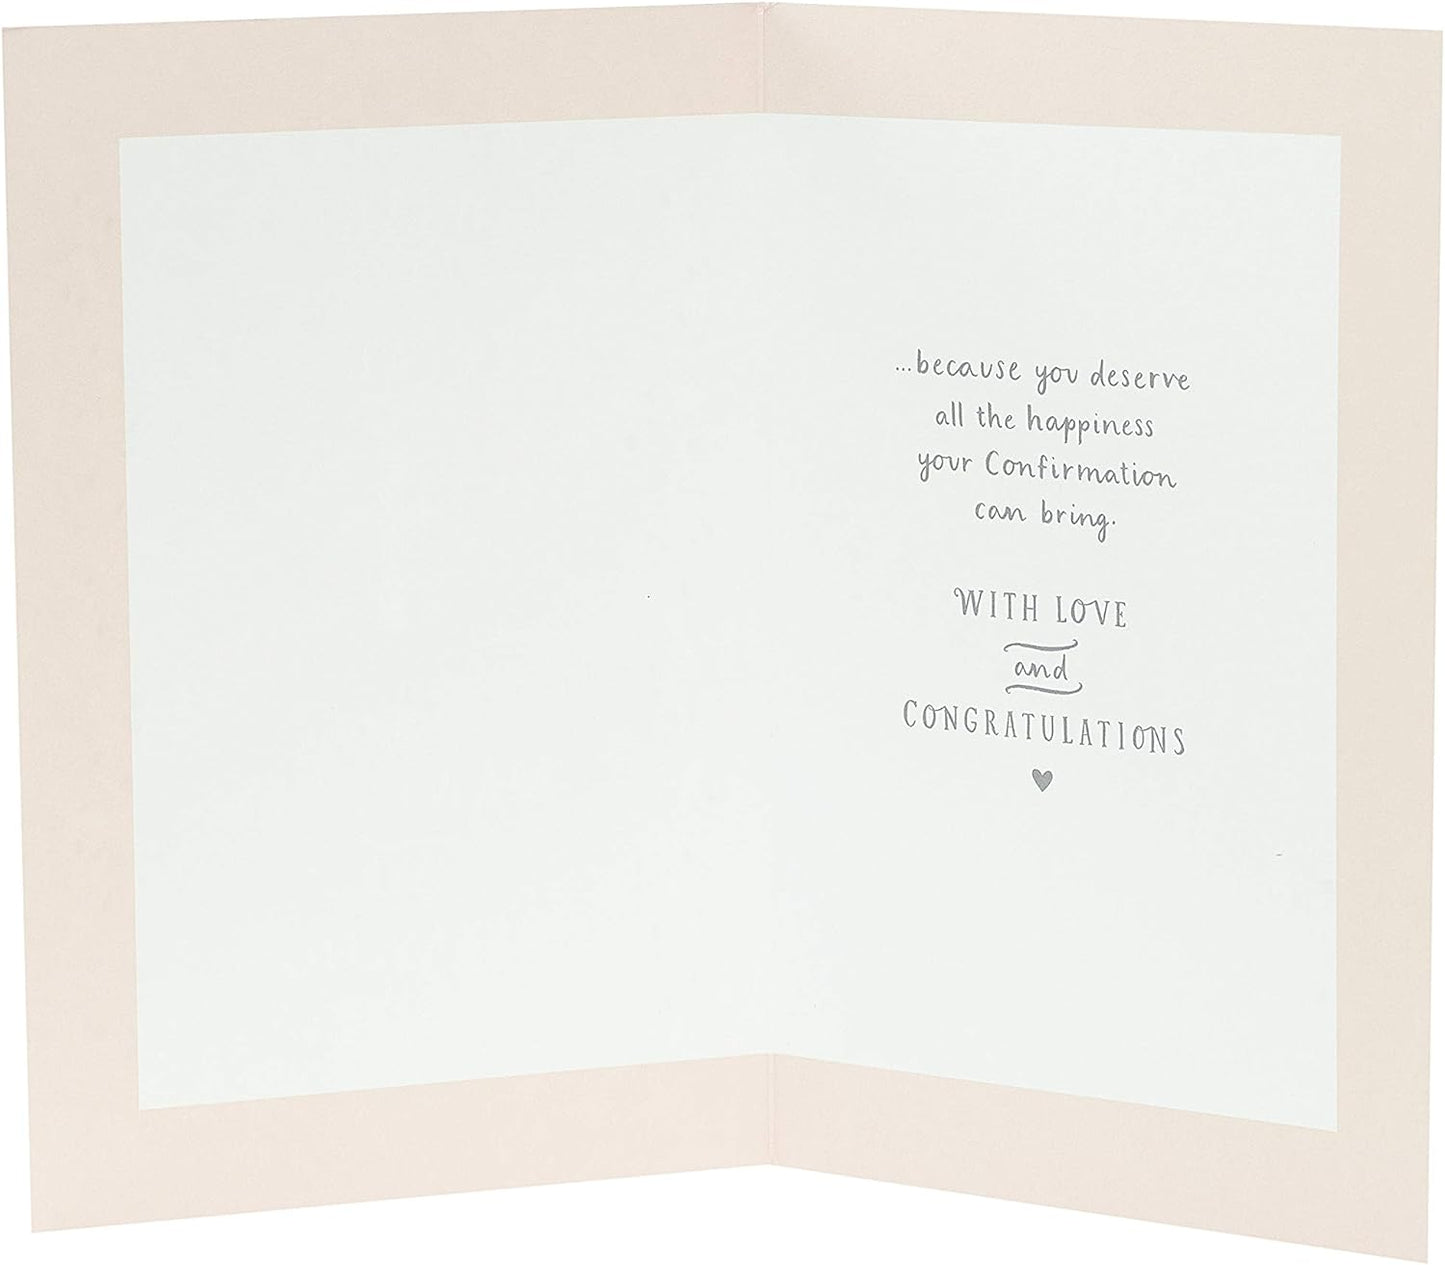 For a Special Girl Confirmation Congratulations Card